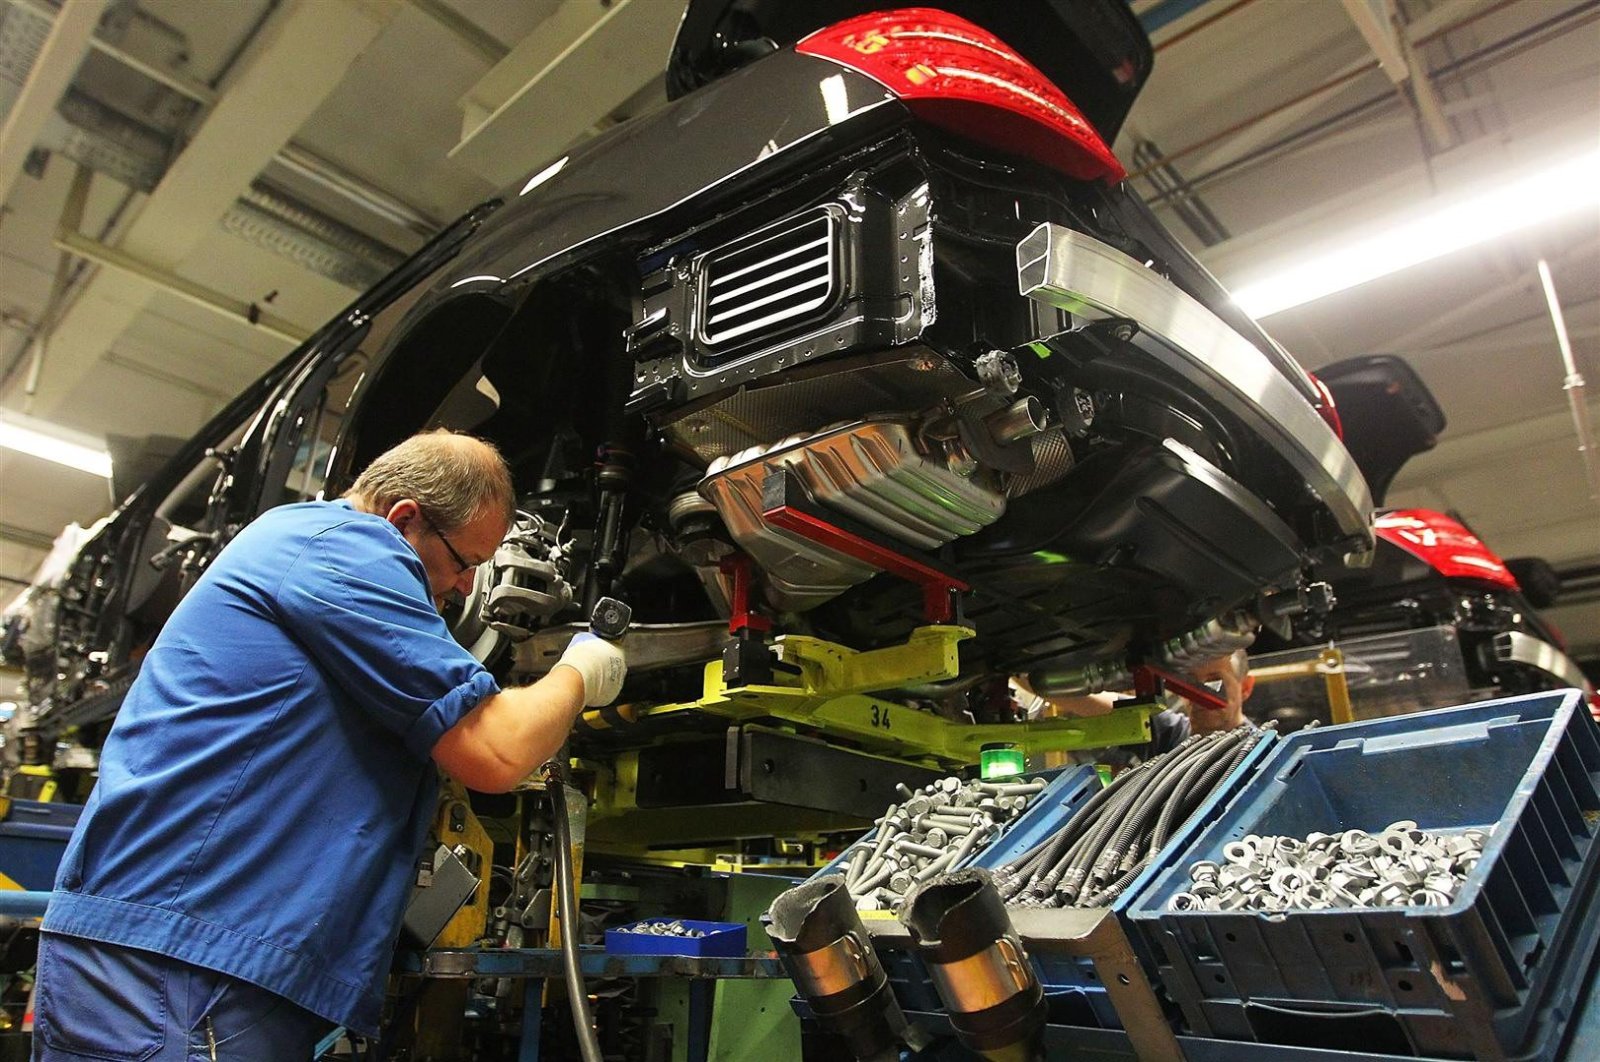 An employee works on a Daimler AG Mercedes-Benz S-Class vehicle on the production line in Sindelfingen, Germany, Jan. 30, 2012. (Getty Images)